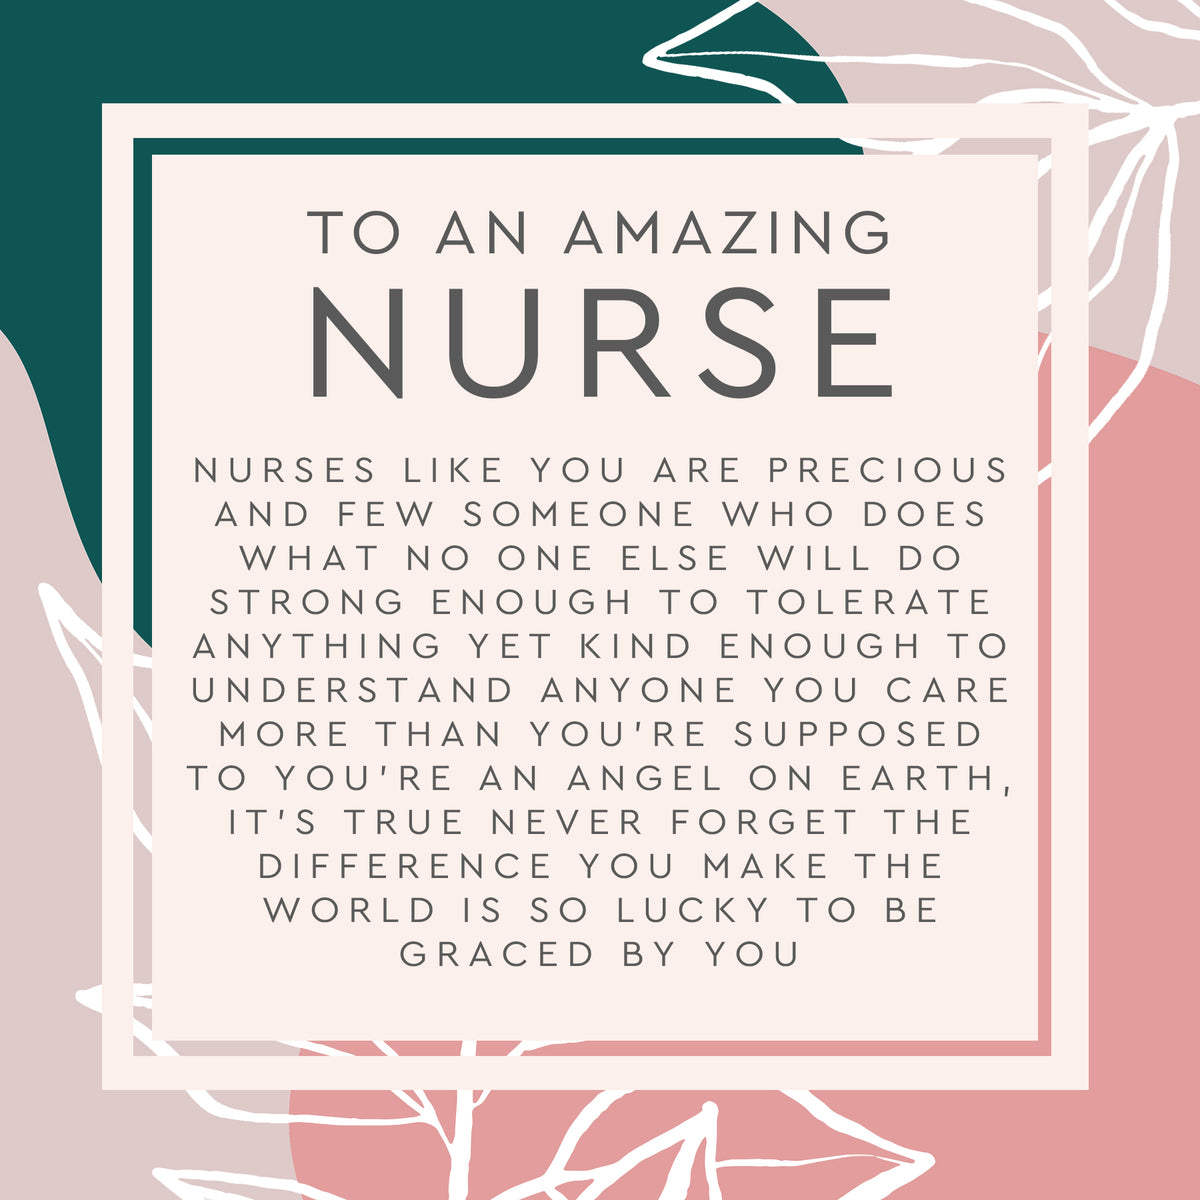 Nurses Recommend Gifts To Give (and Not To Give) For Nurses Week